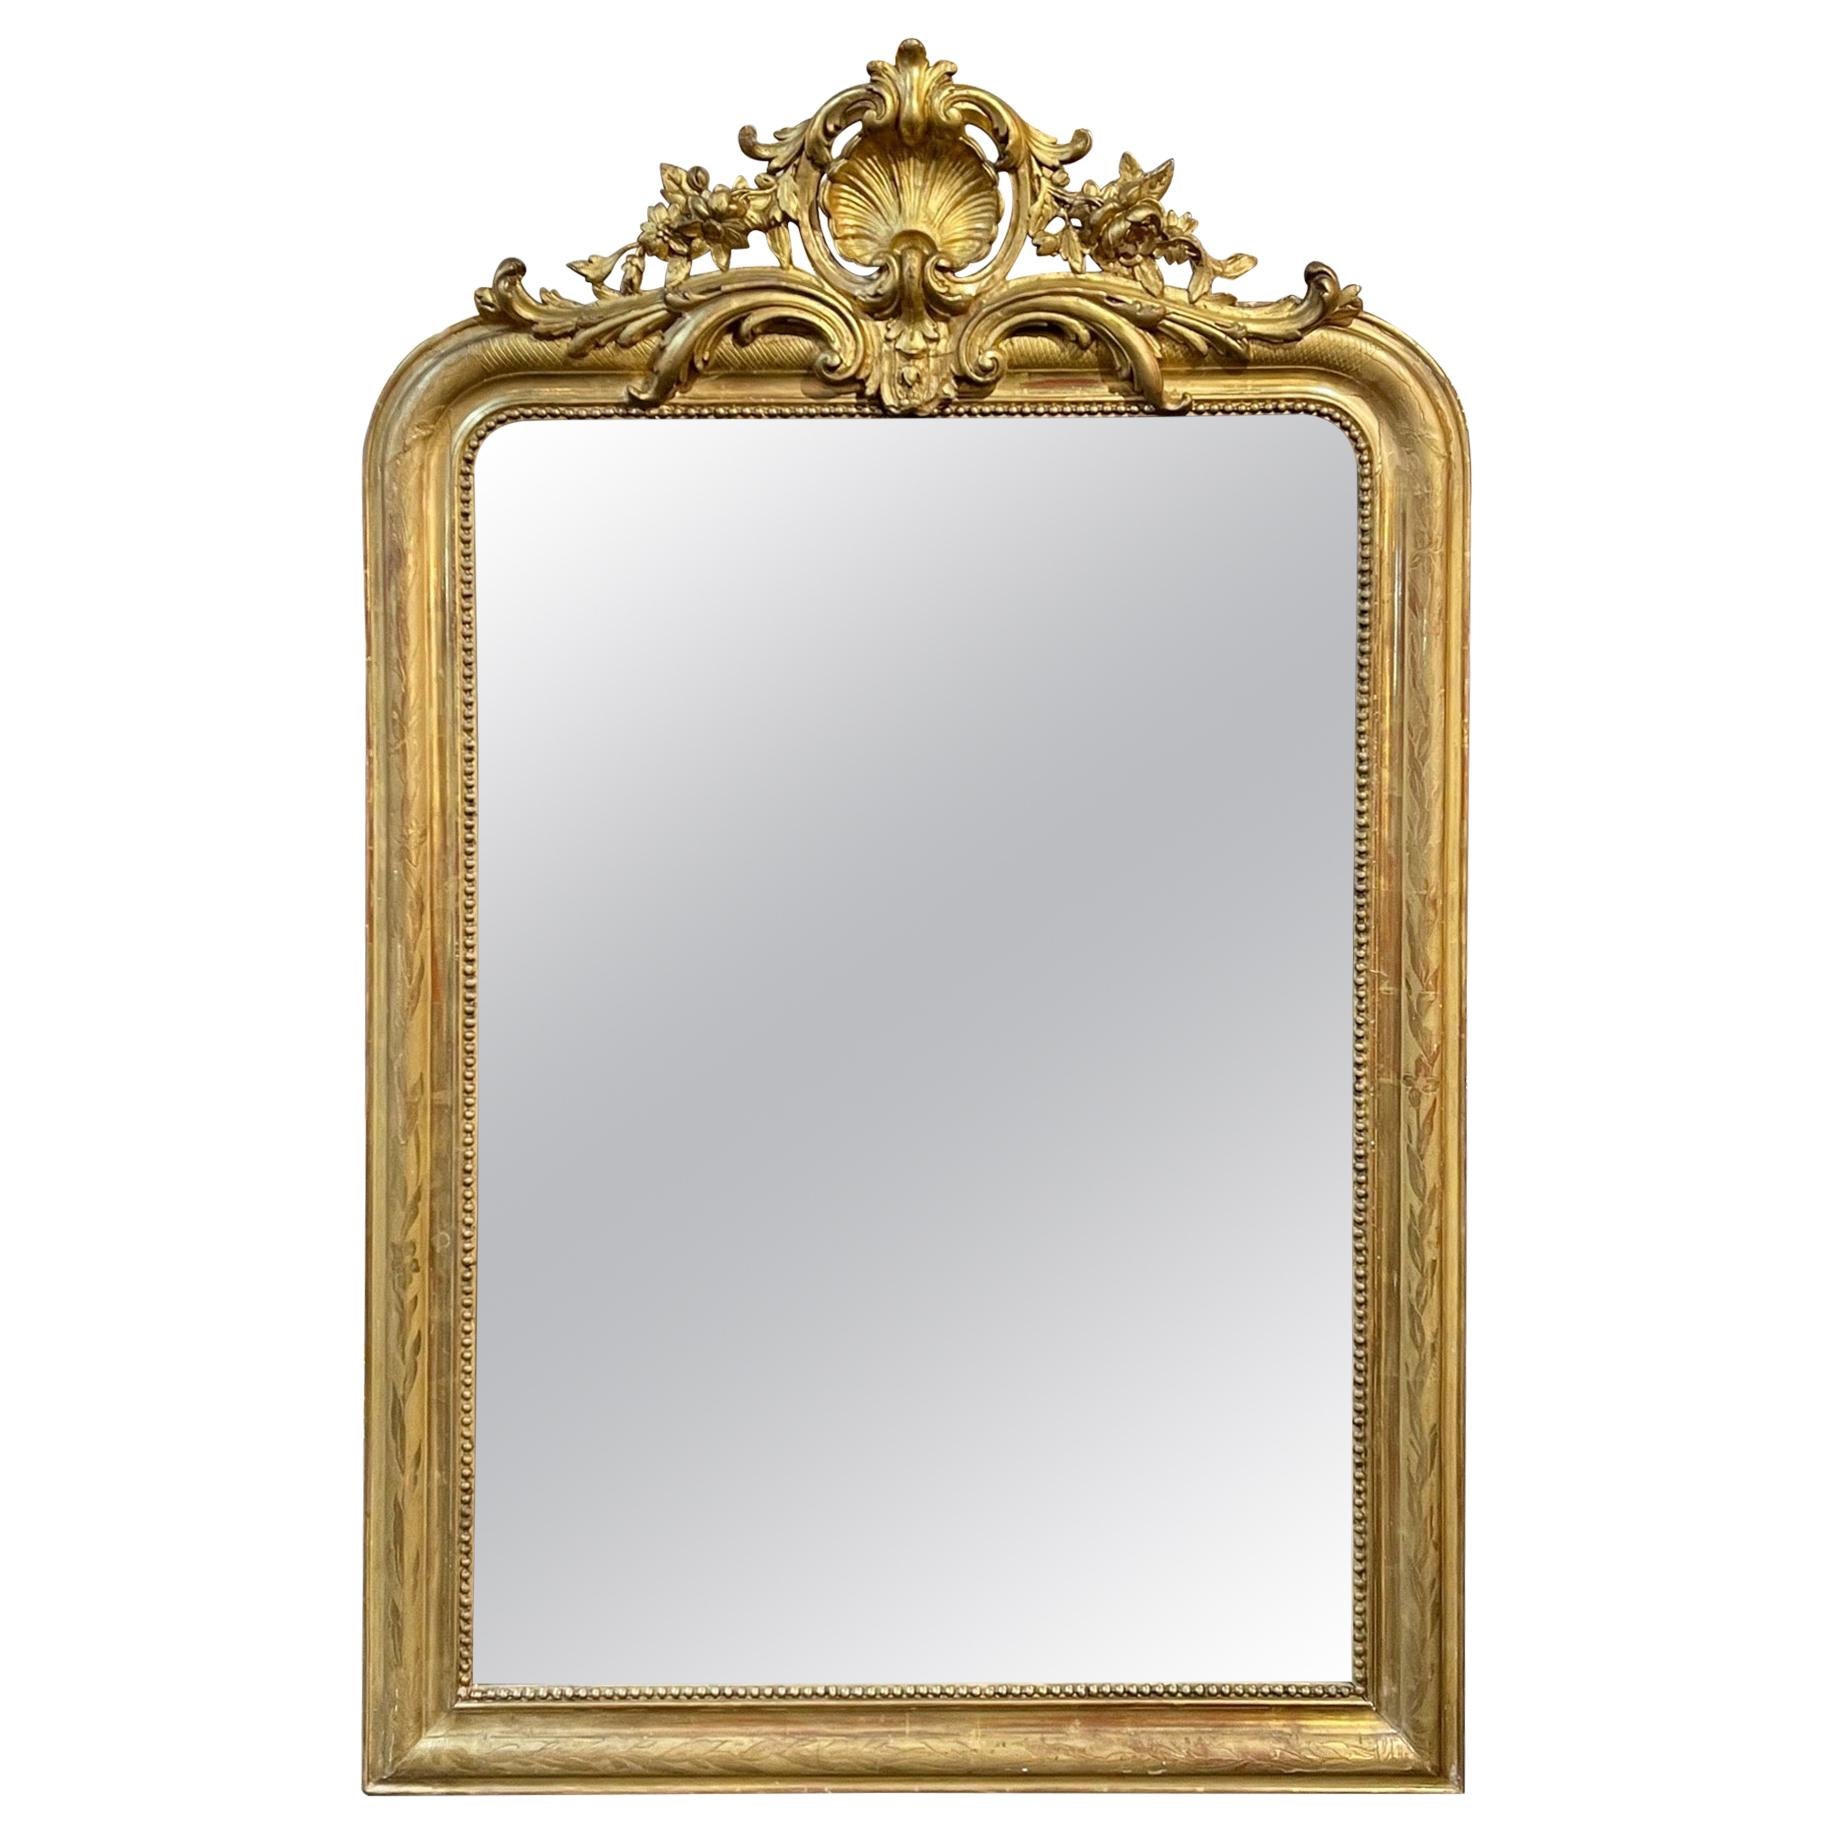 19th Century French Gold Louis Philippe Mirror with Crest